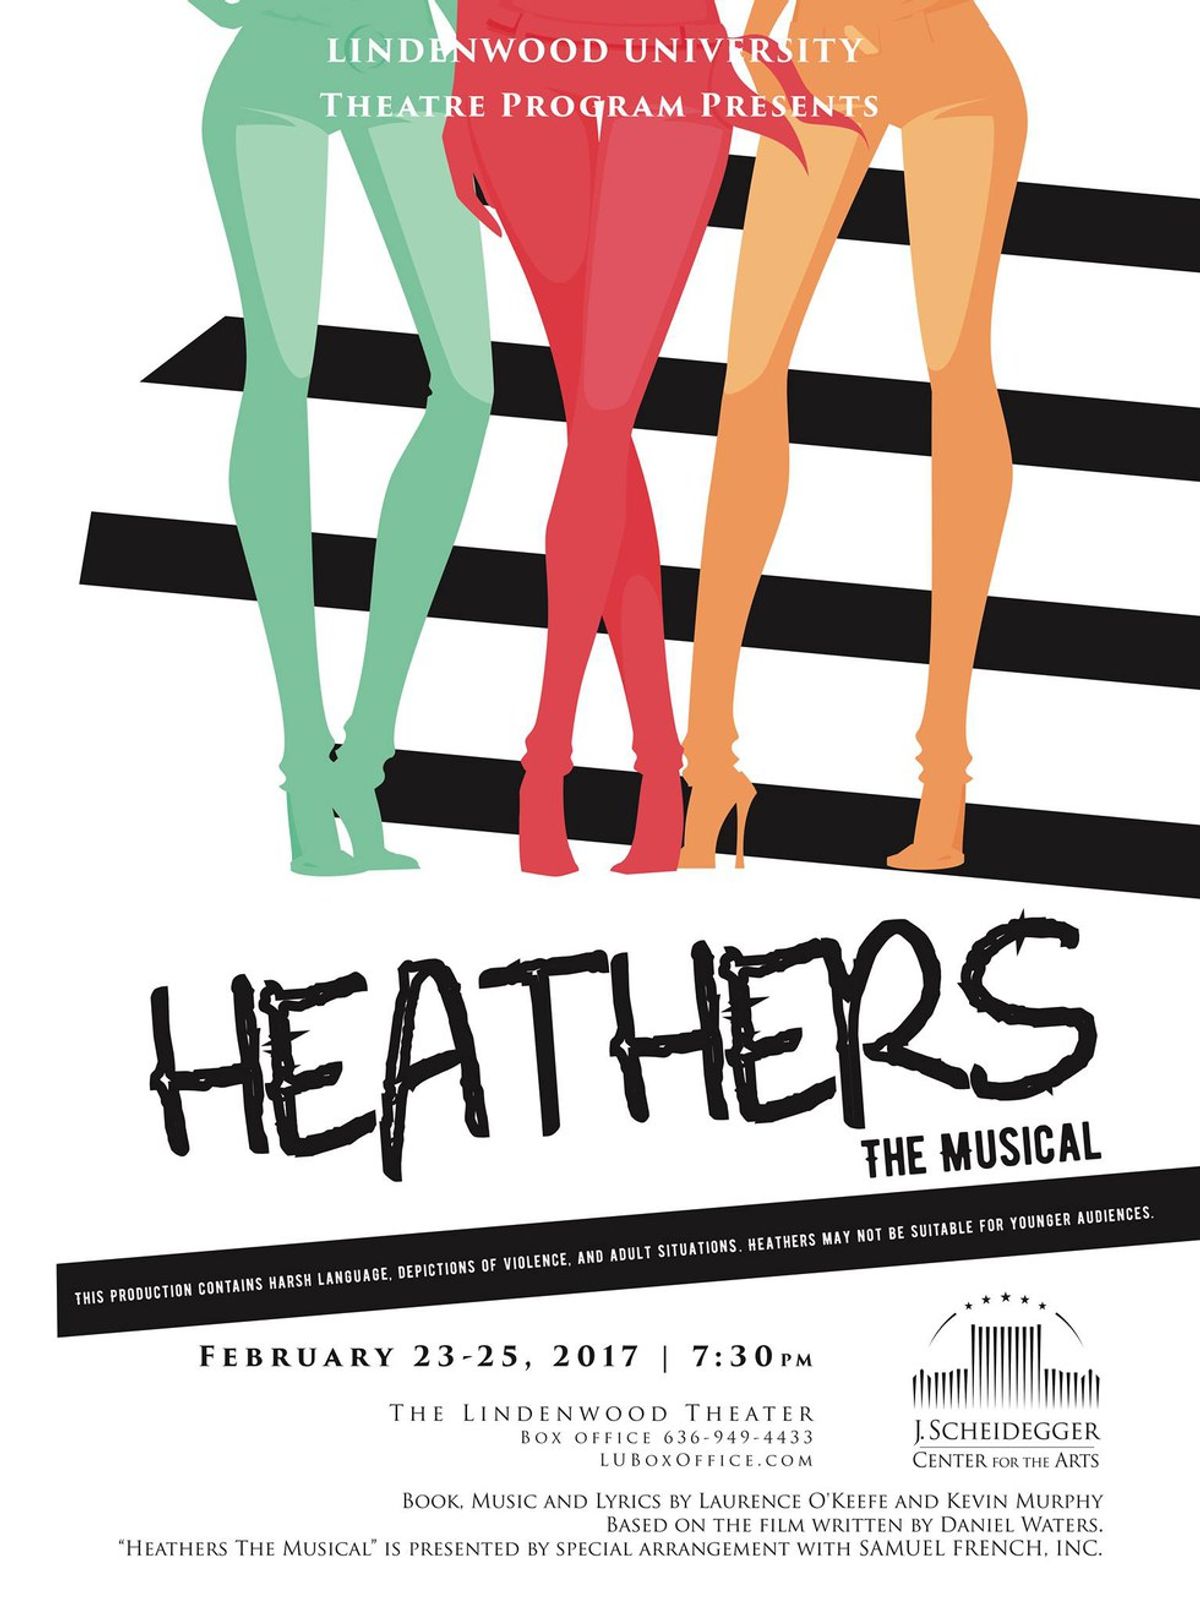 Why I'm Going To See Heathers